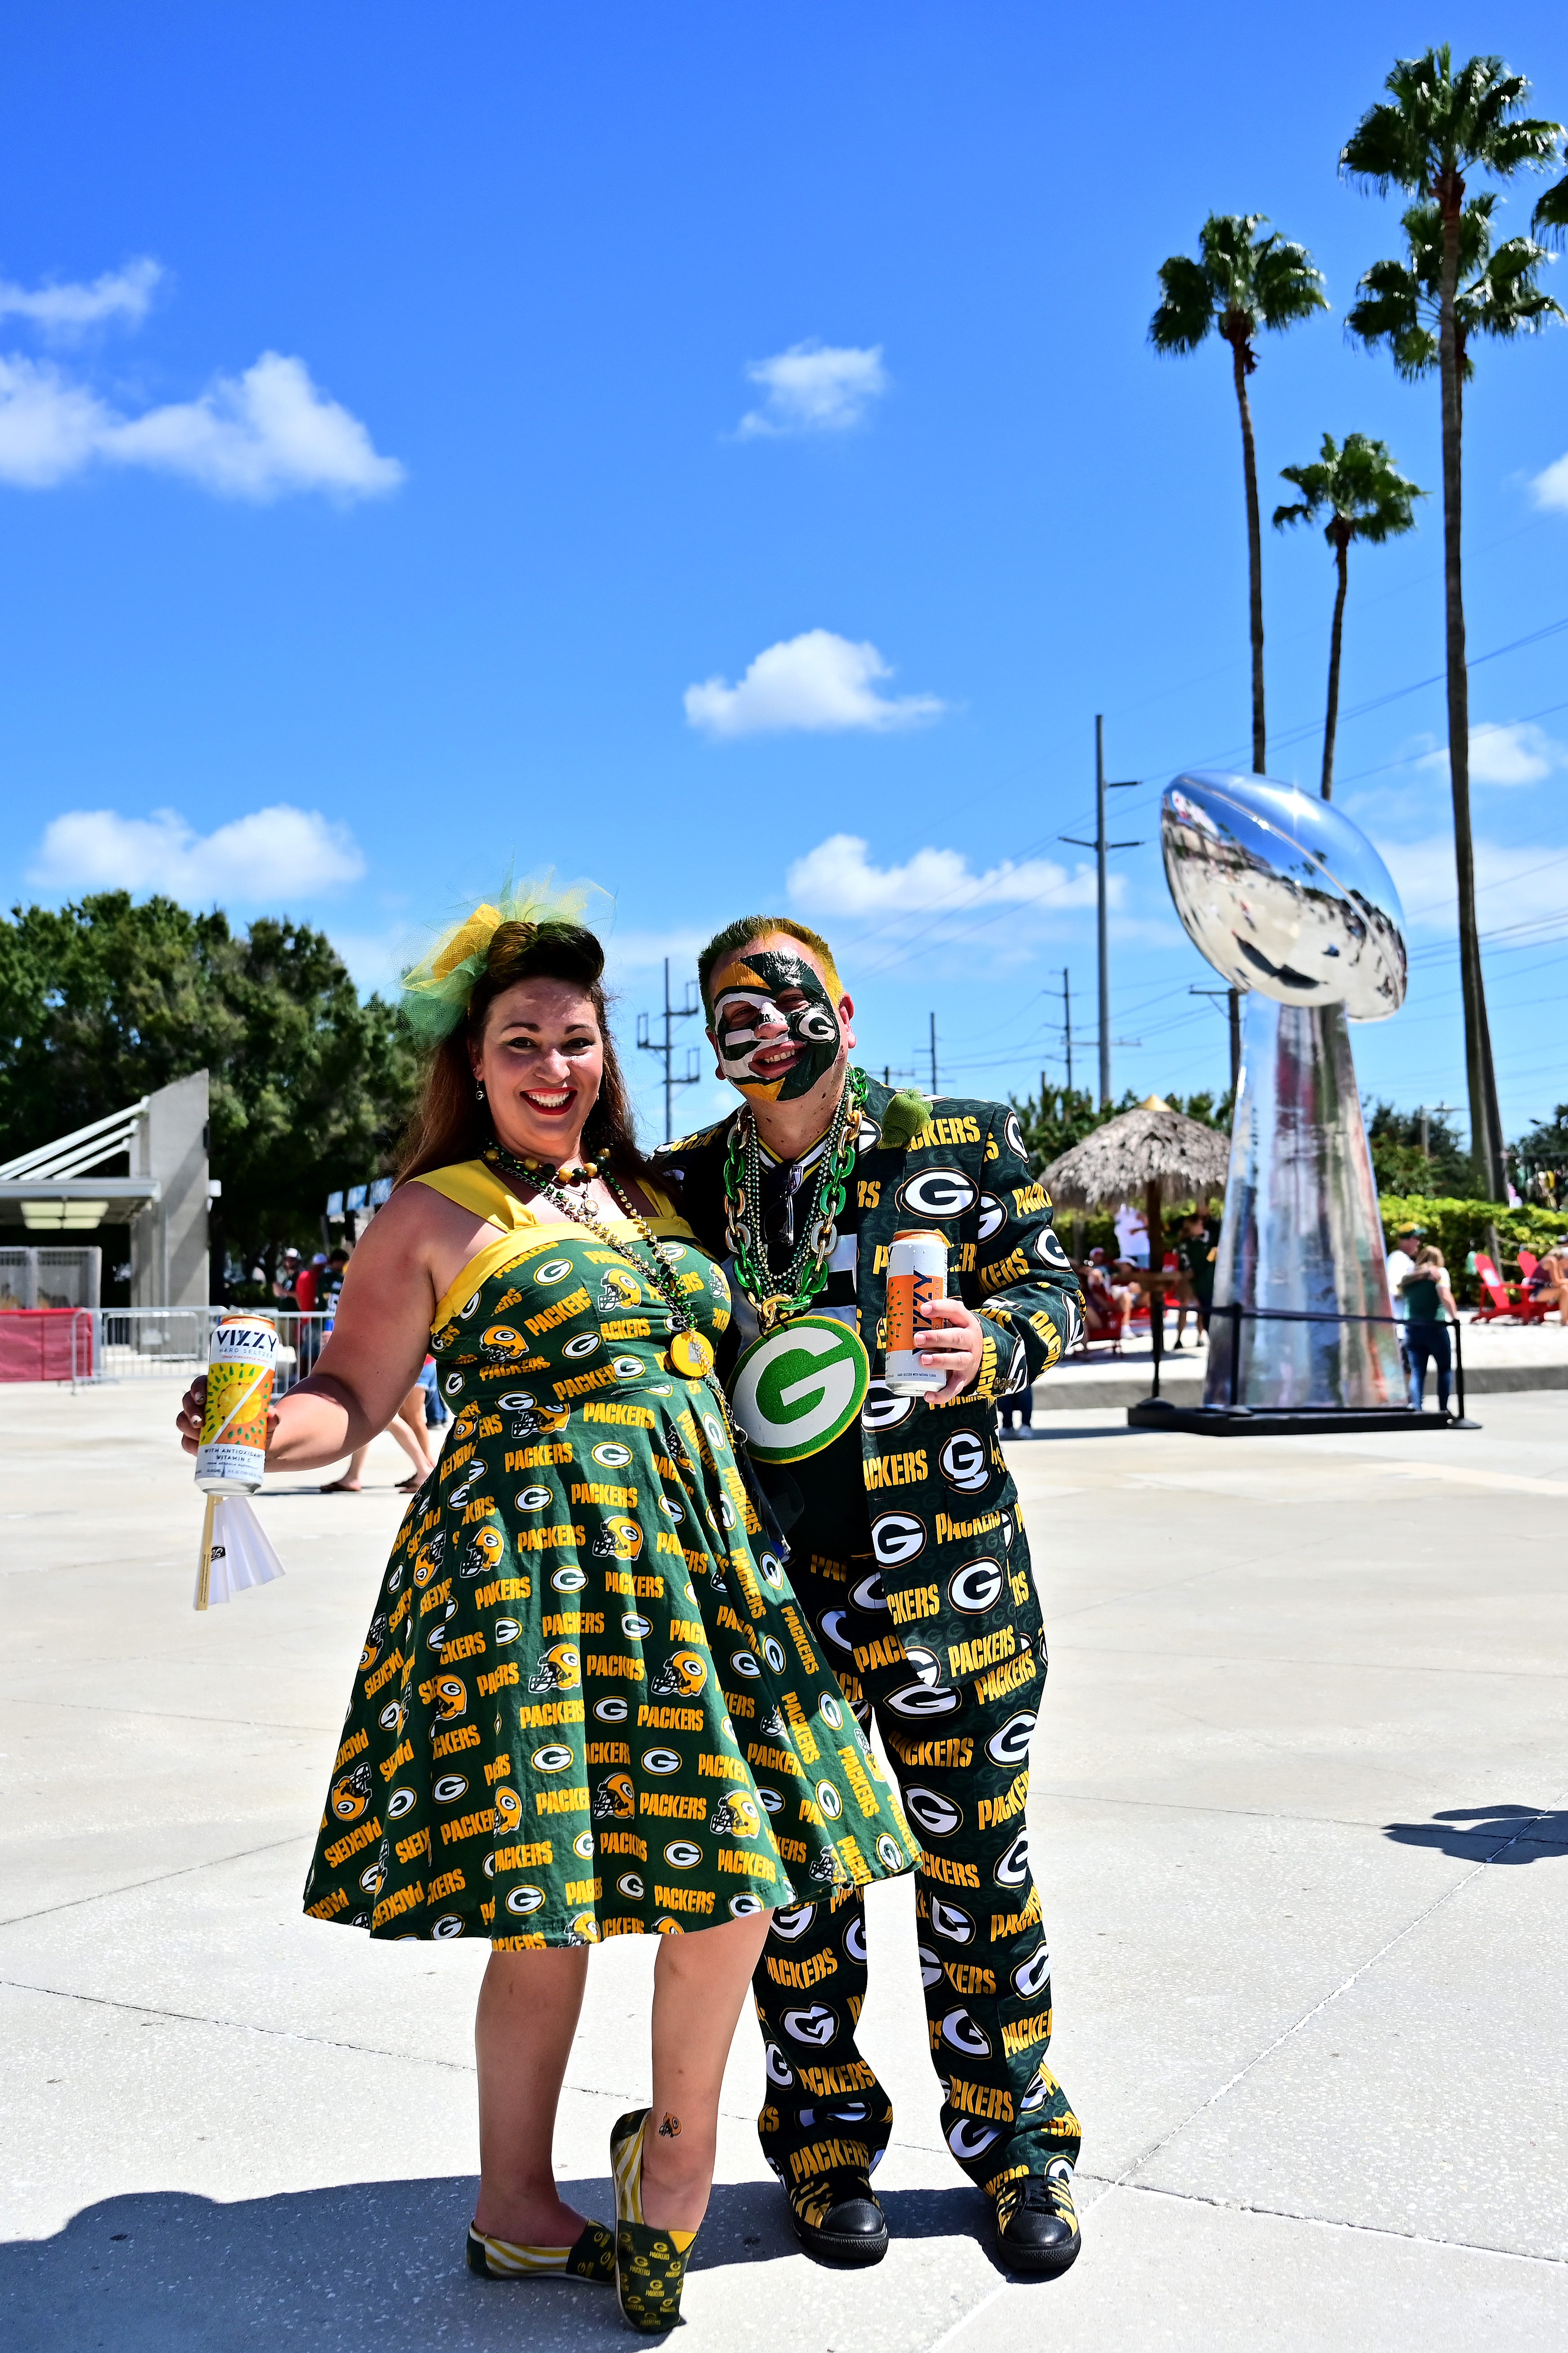 Green Bay Packers fans pose outside of Raymond James Stadium prior to the Packers' game against the Tampa Bay Buccaneers on Sept. 25, 2022 in Tampa, Florida.